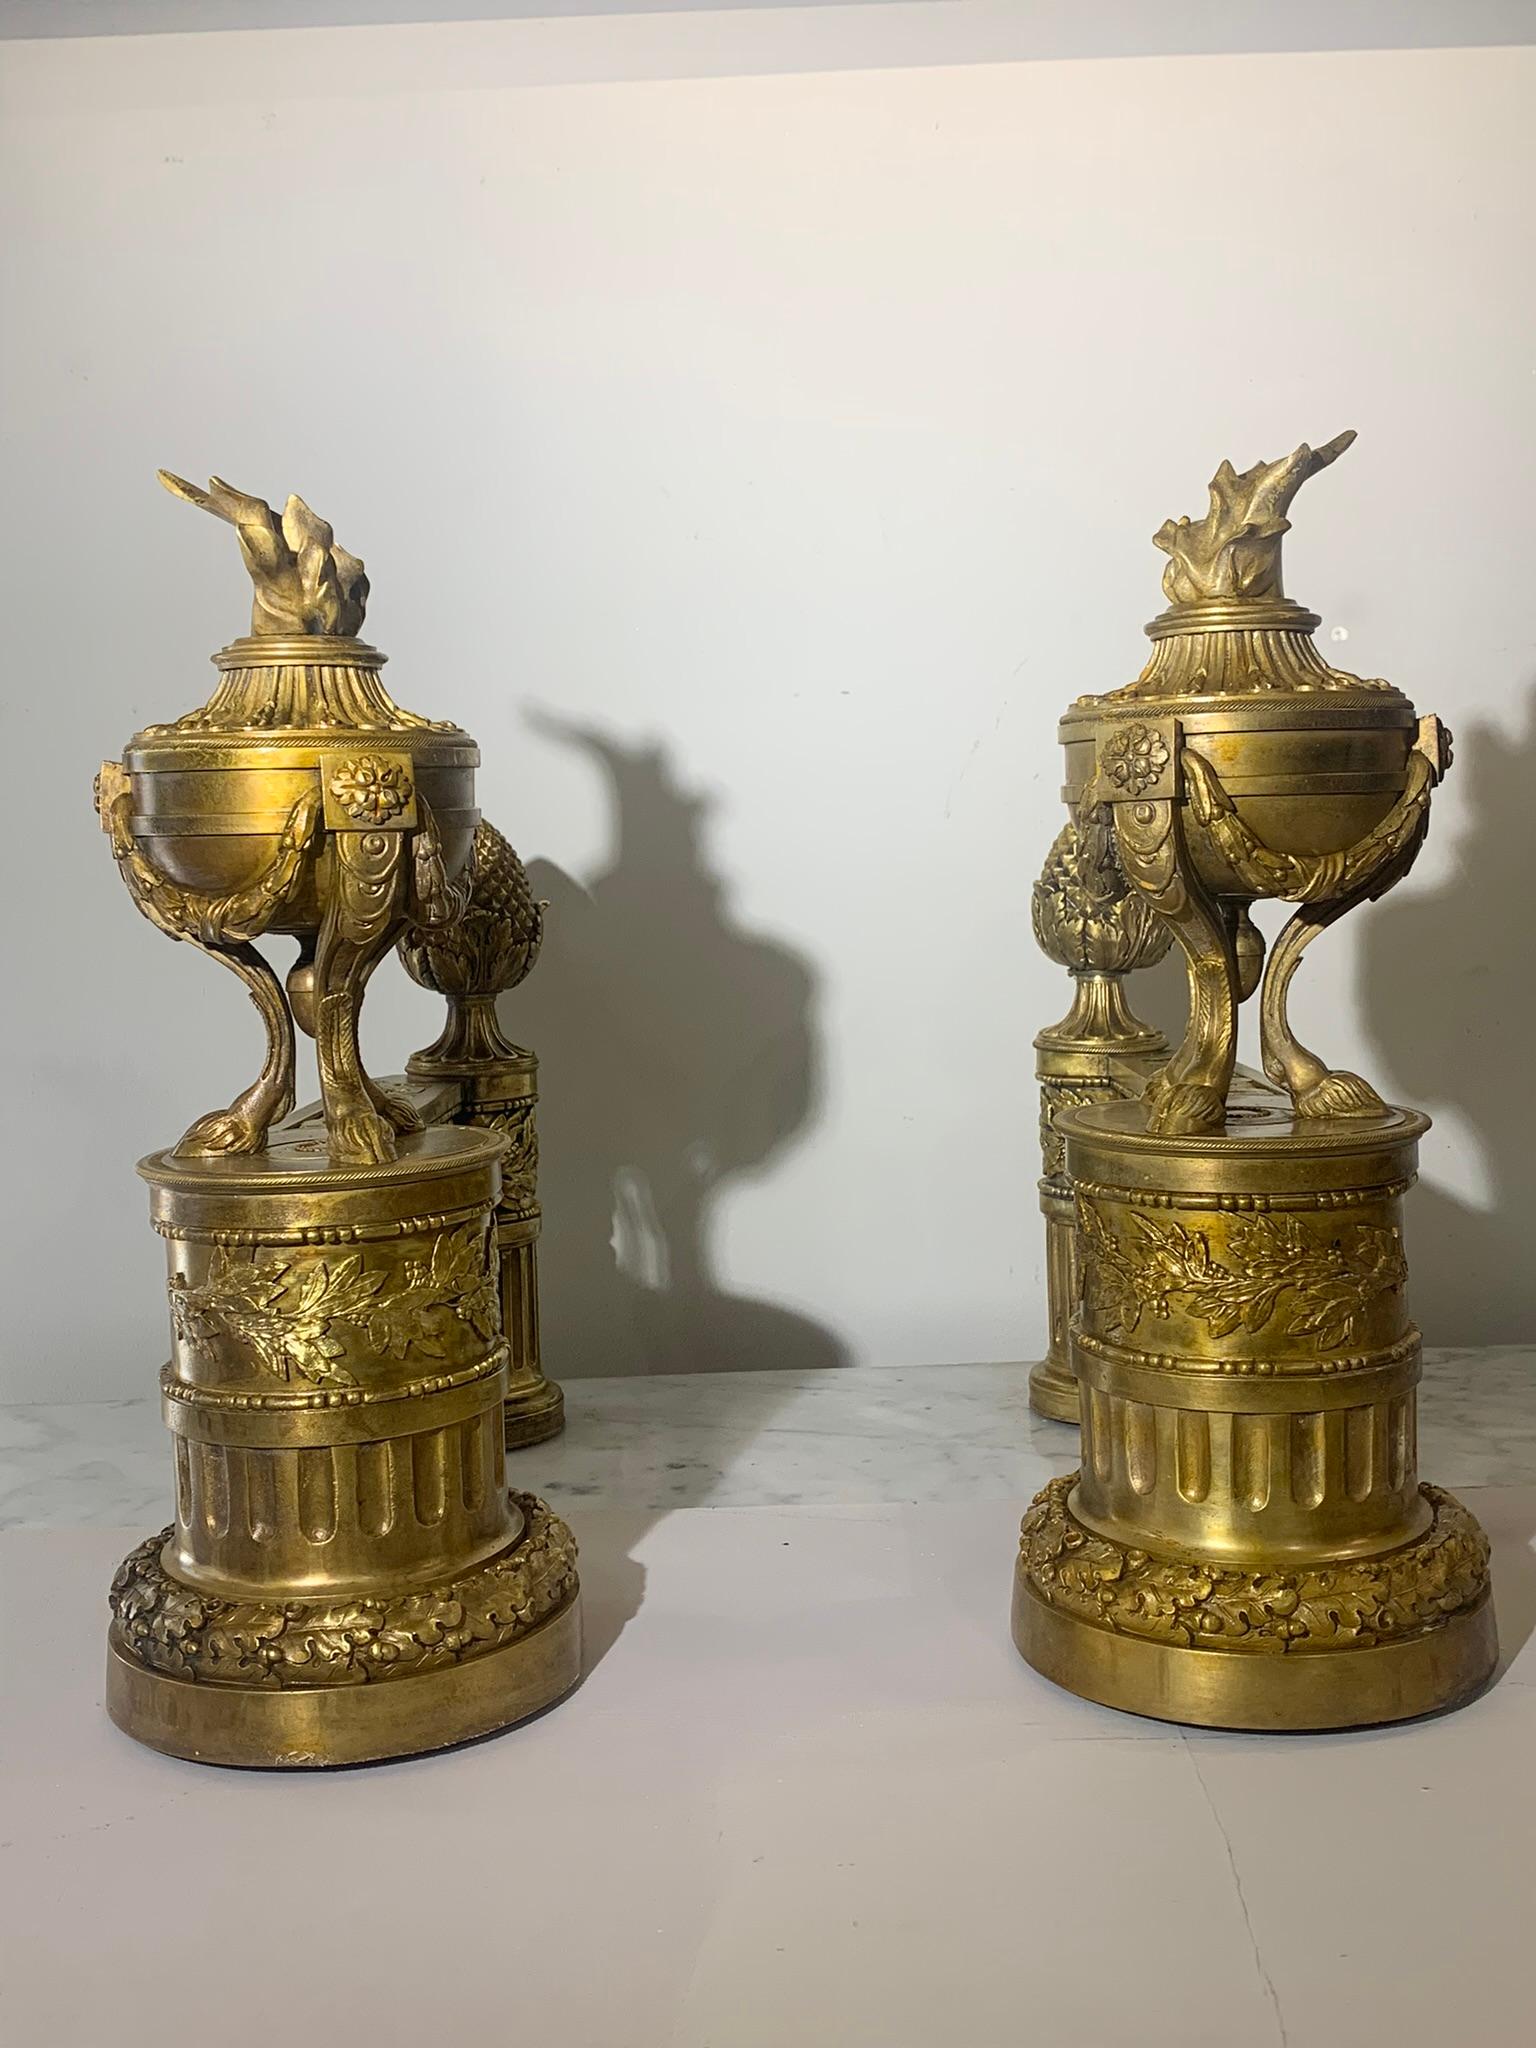 LATE 18th CENTURY PAIR OF NEOCLASSICAL GILDED BRONZE ANDIRONS For Sale 11